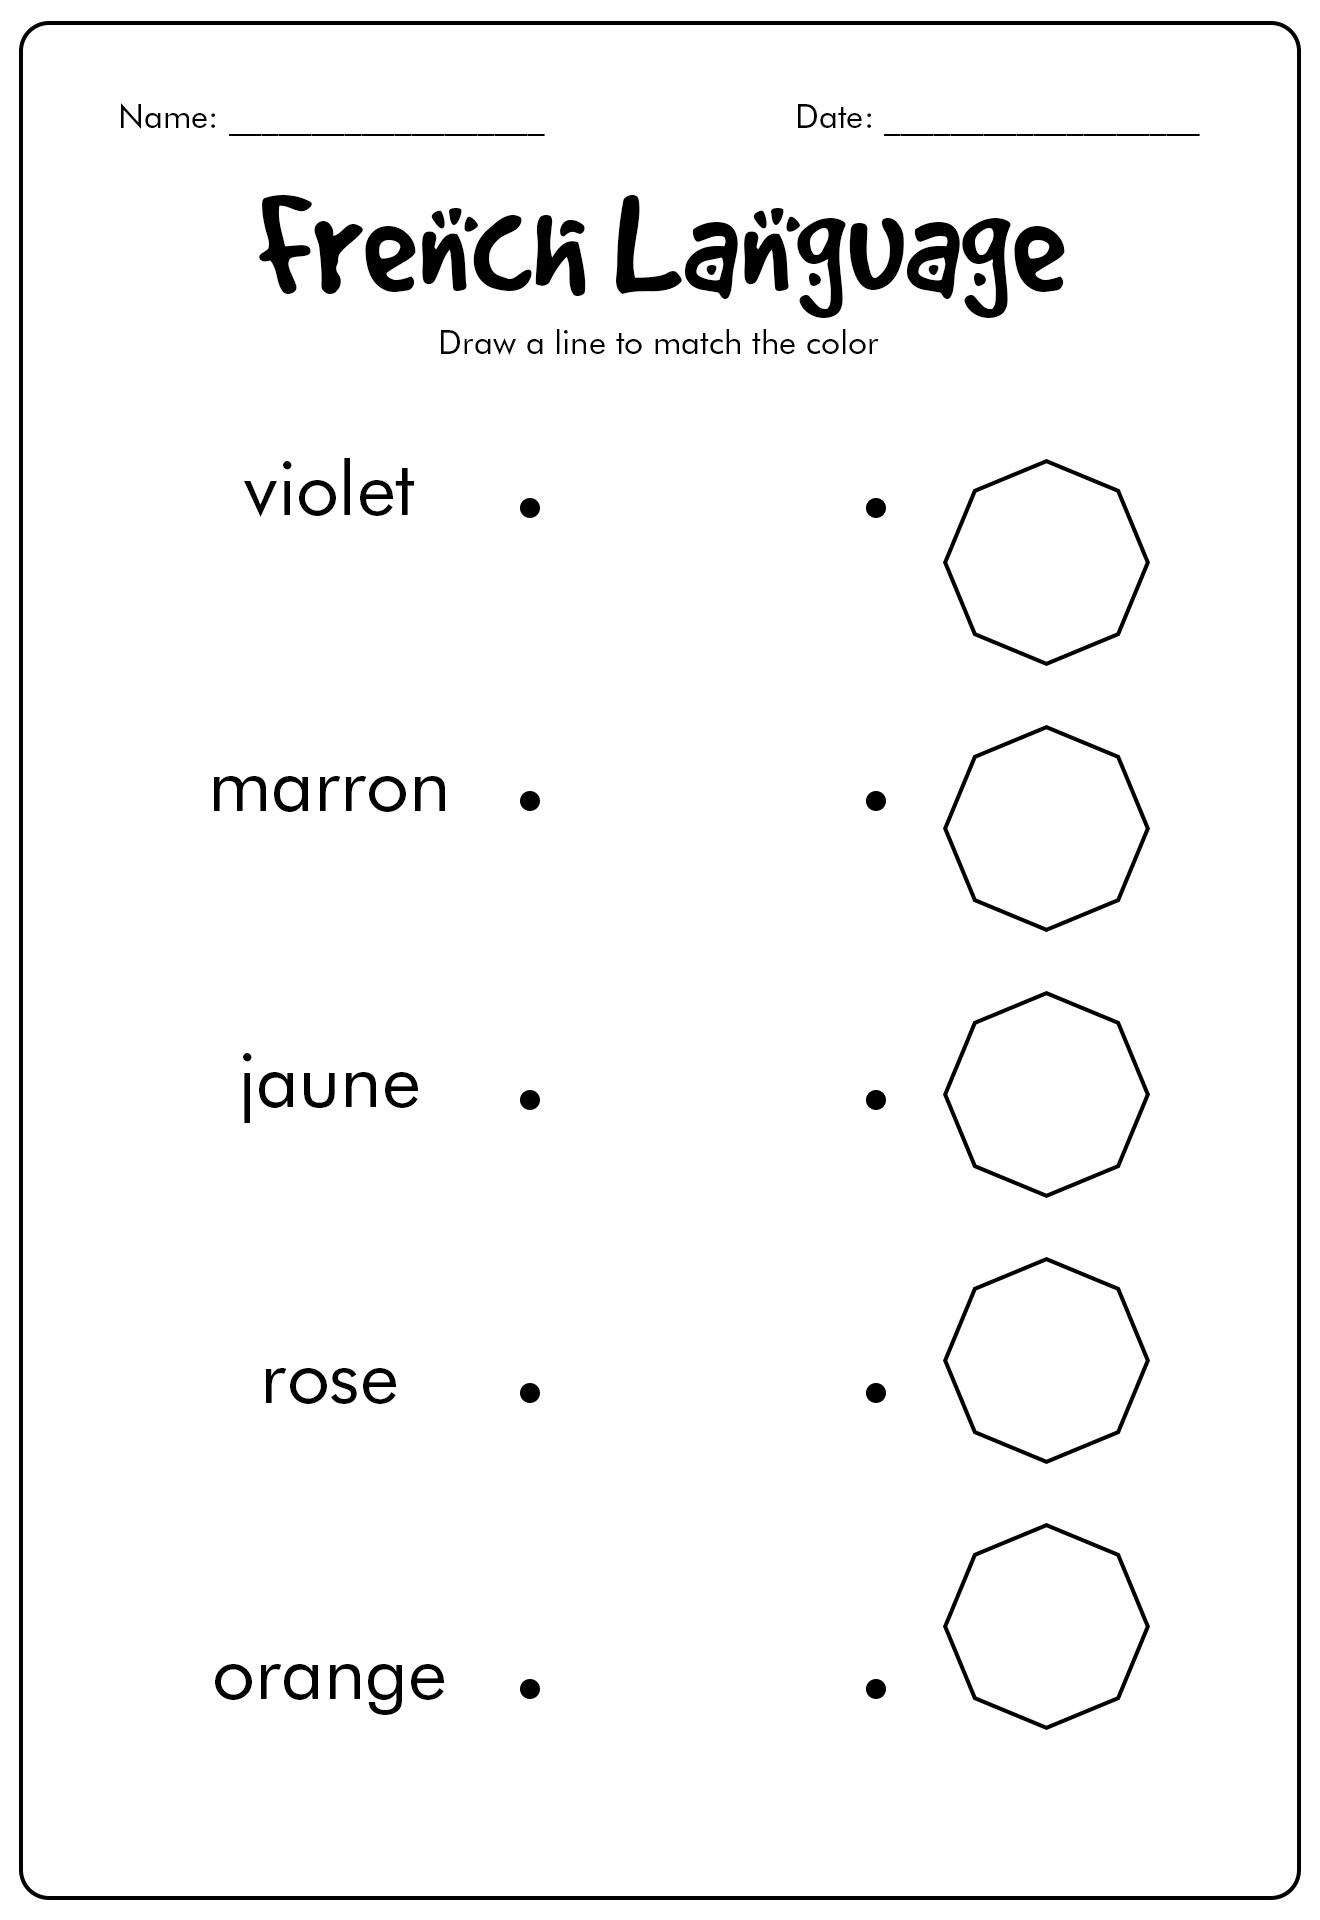 11 Best Images Of Beginner French Worksheets Free Printable French Worksheets Beginners